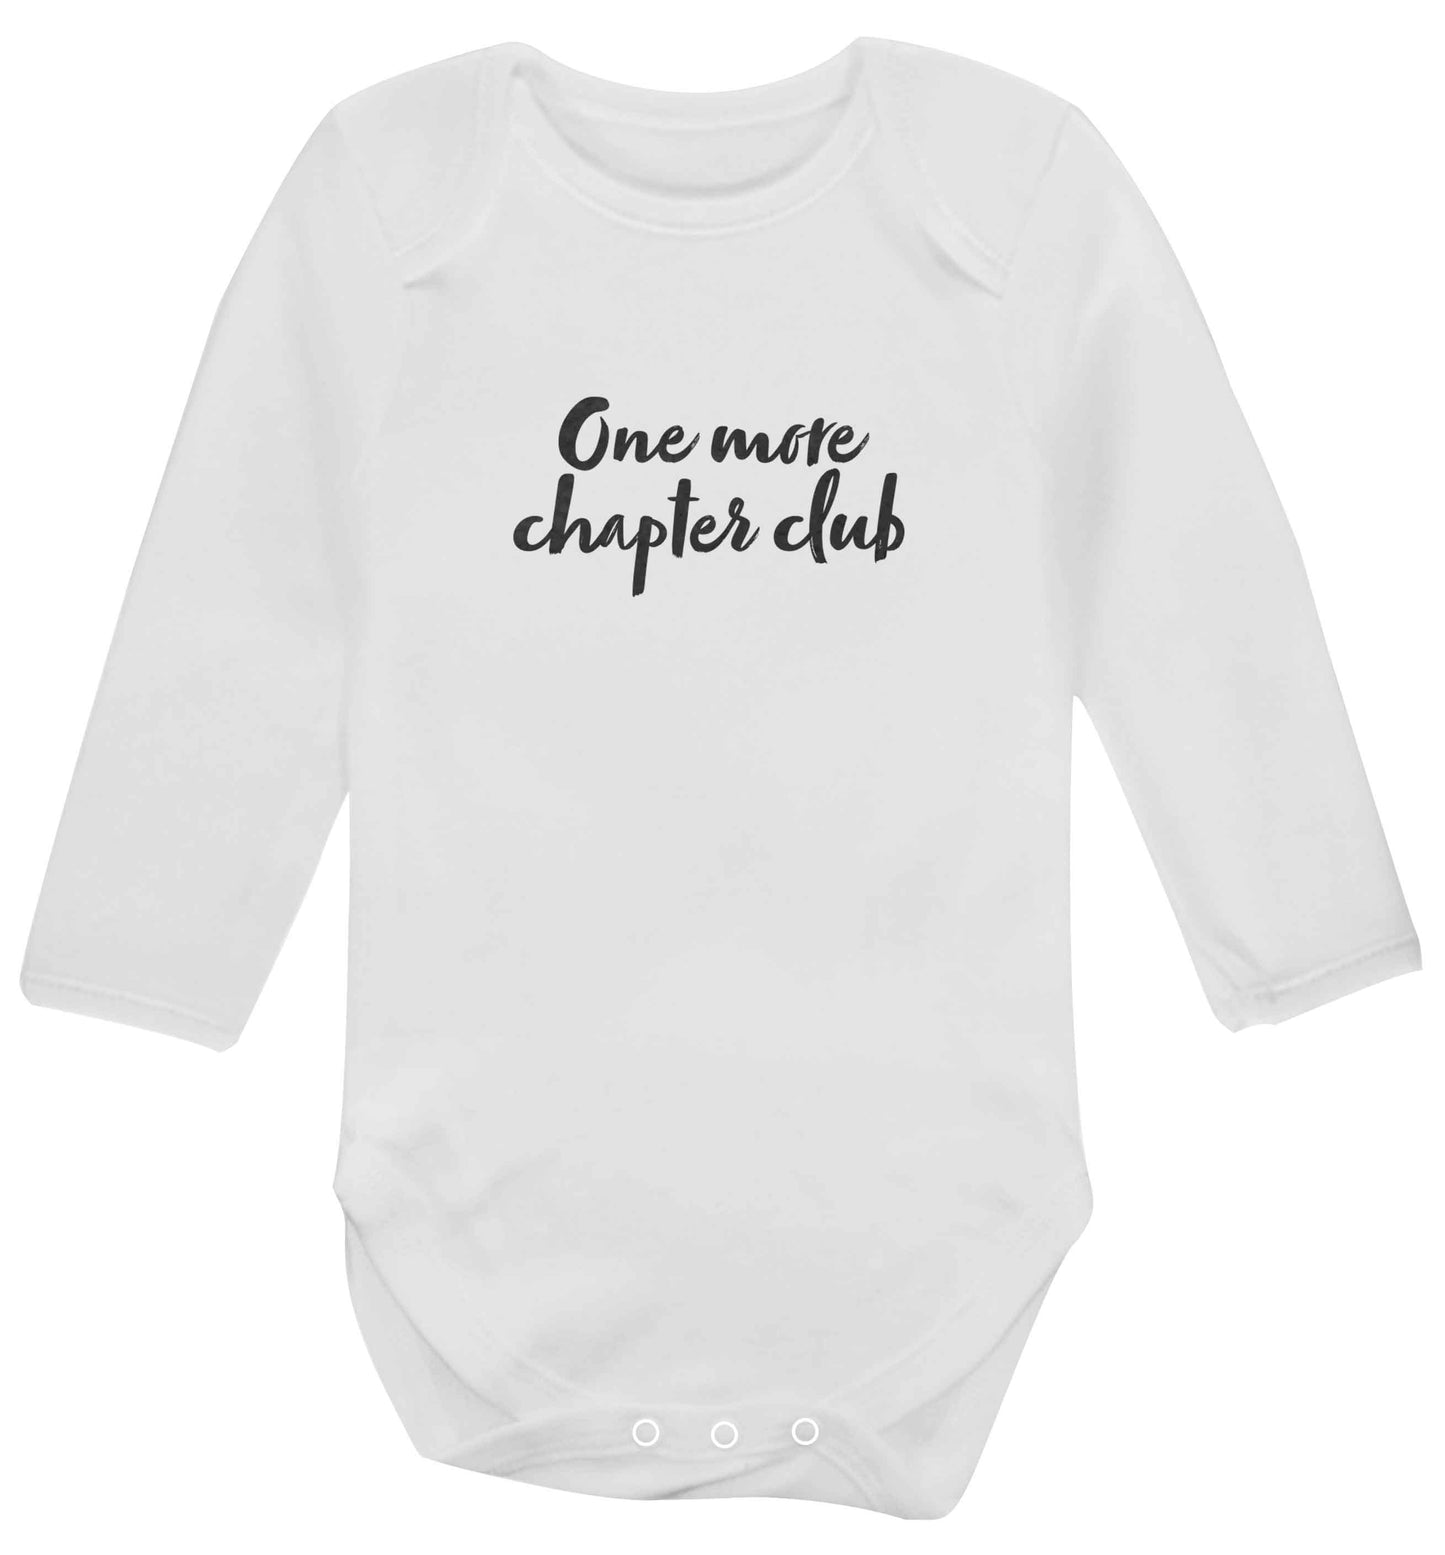 One more chapter club Kit baby vest long sleeved white 6-12 months